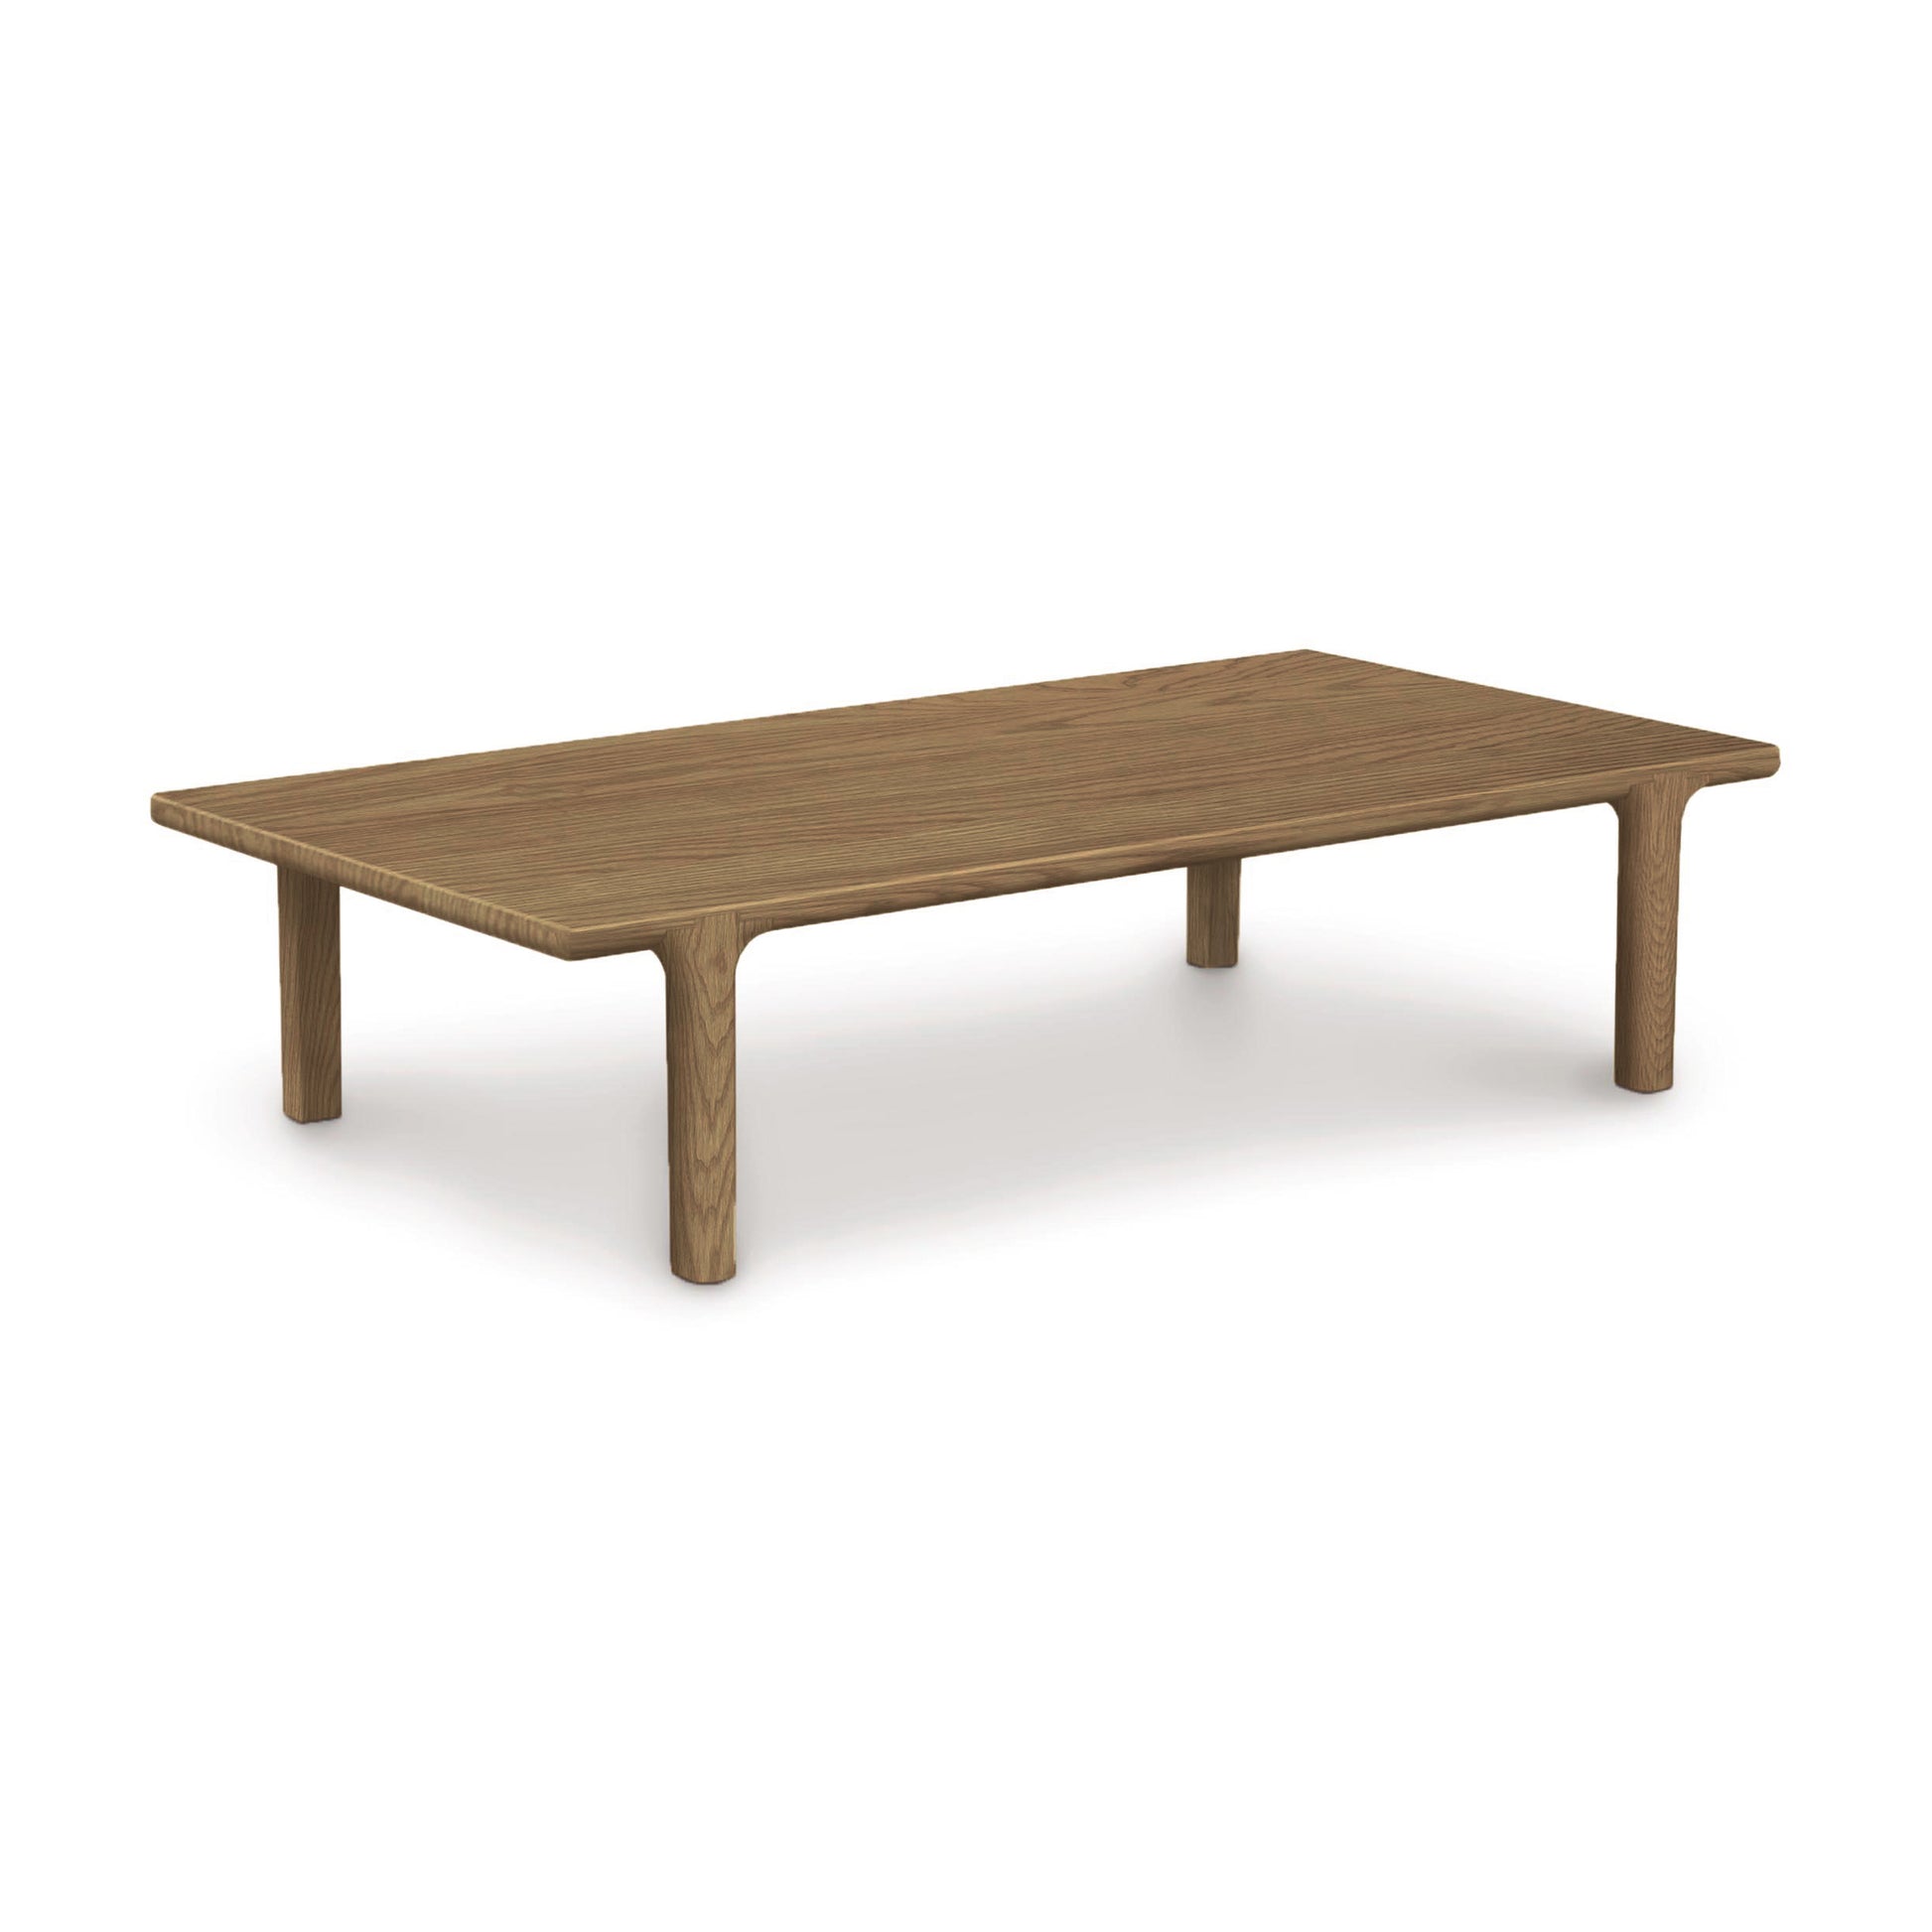 A Sierra Rectangular Coffee Table by Copeland Furniture on a white background.